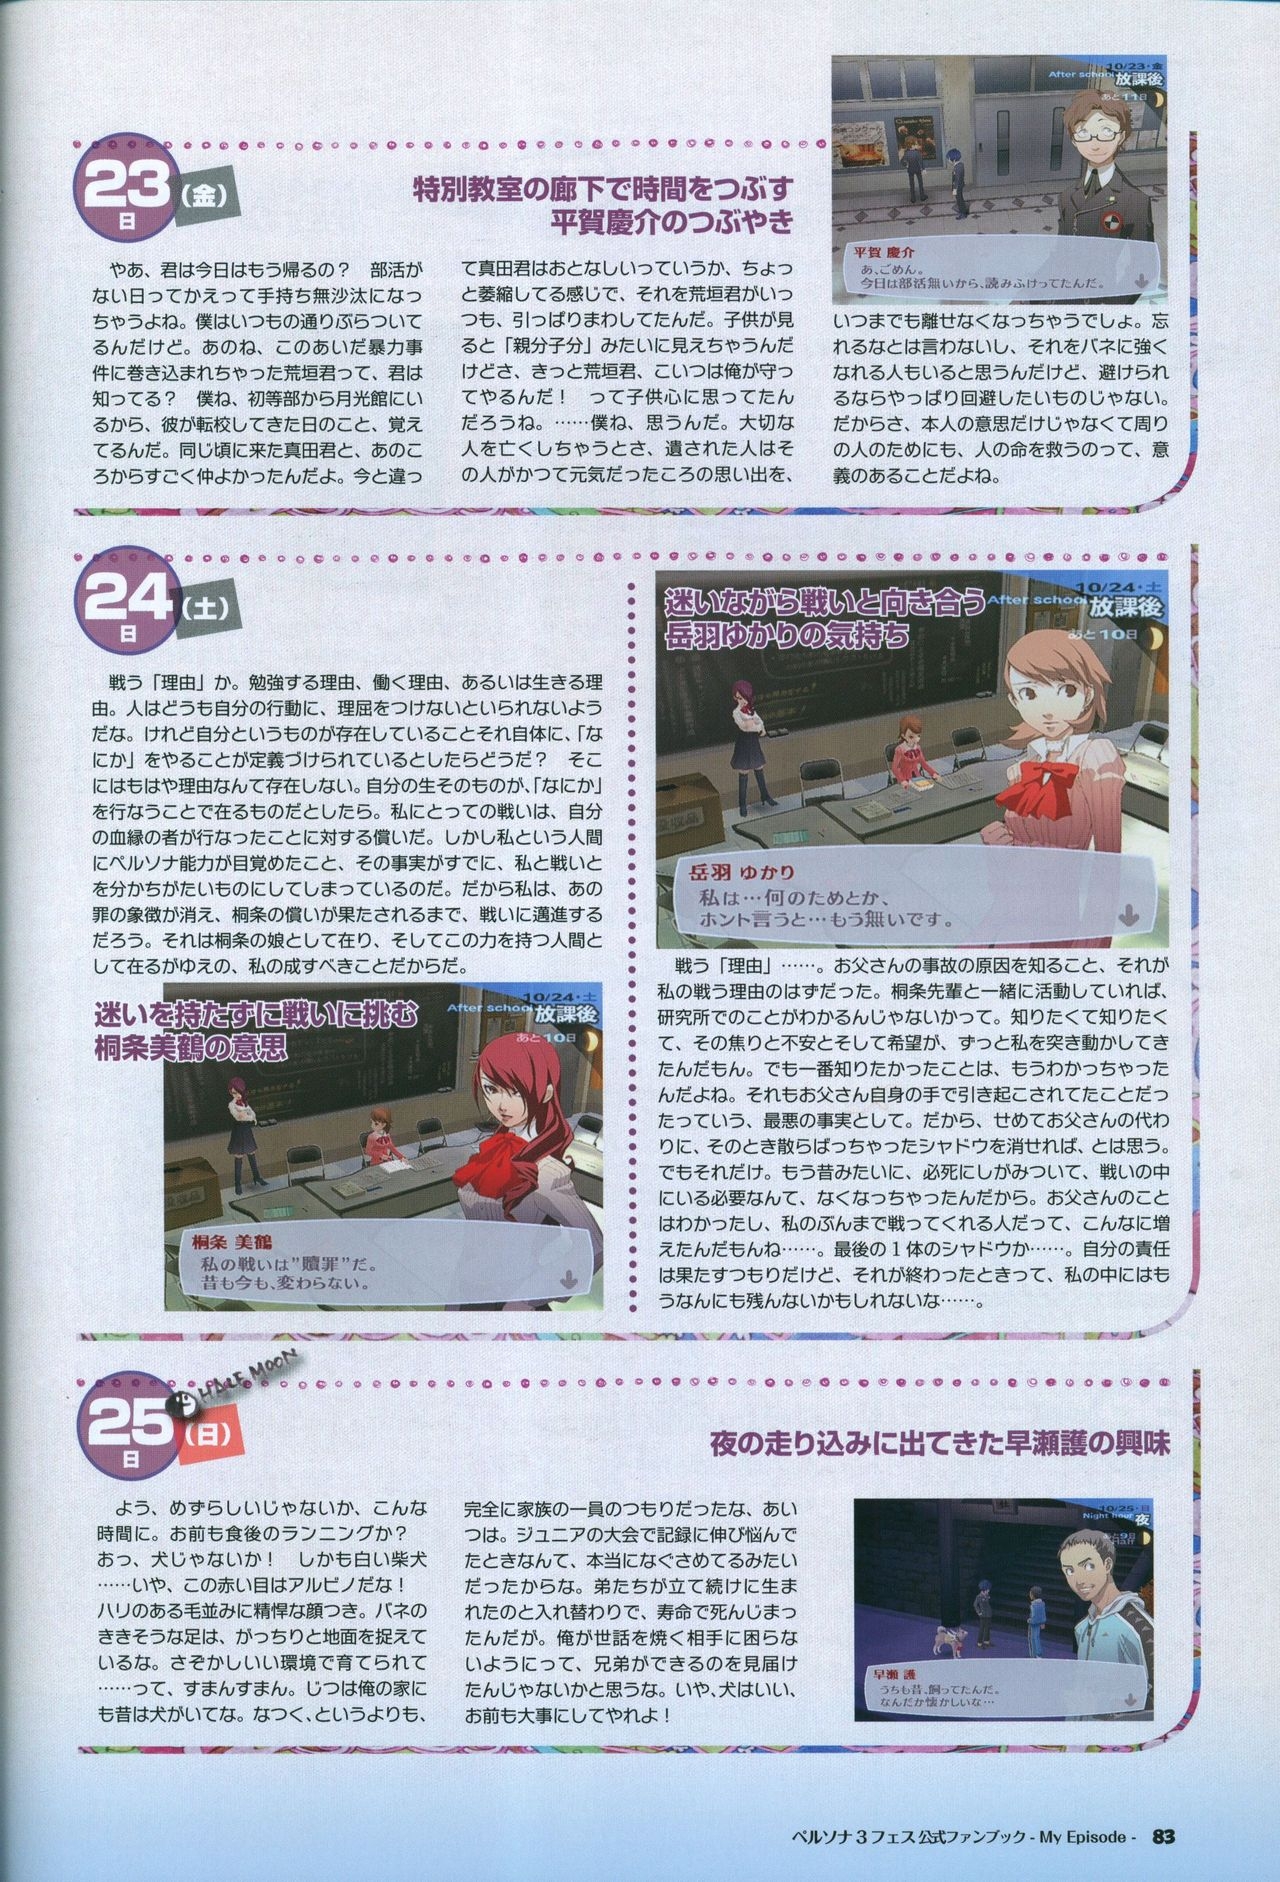 Persona 3 Fes Official Fan Book -My Episode- 84